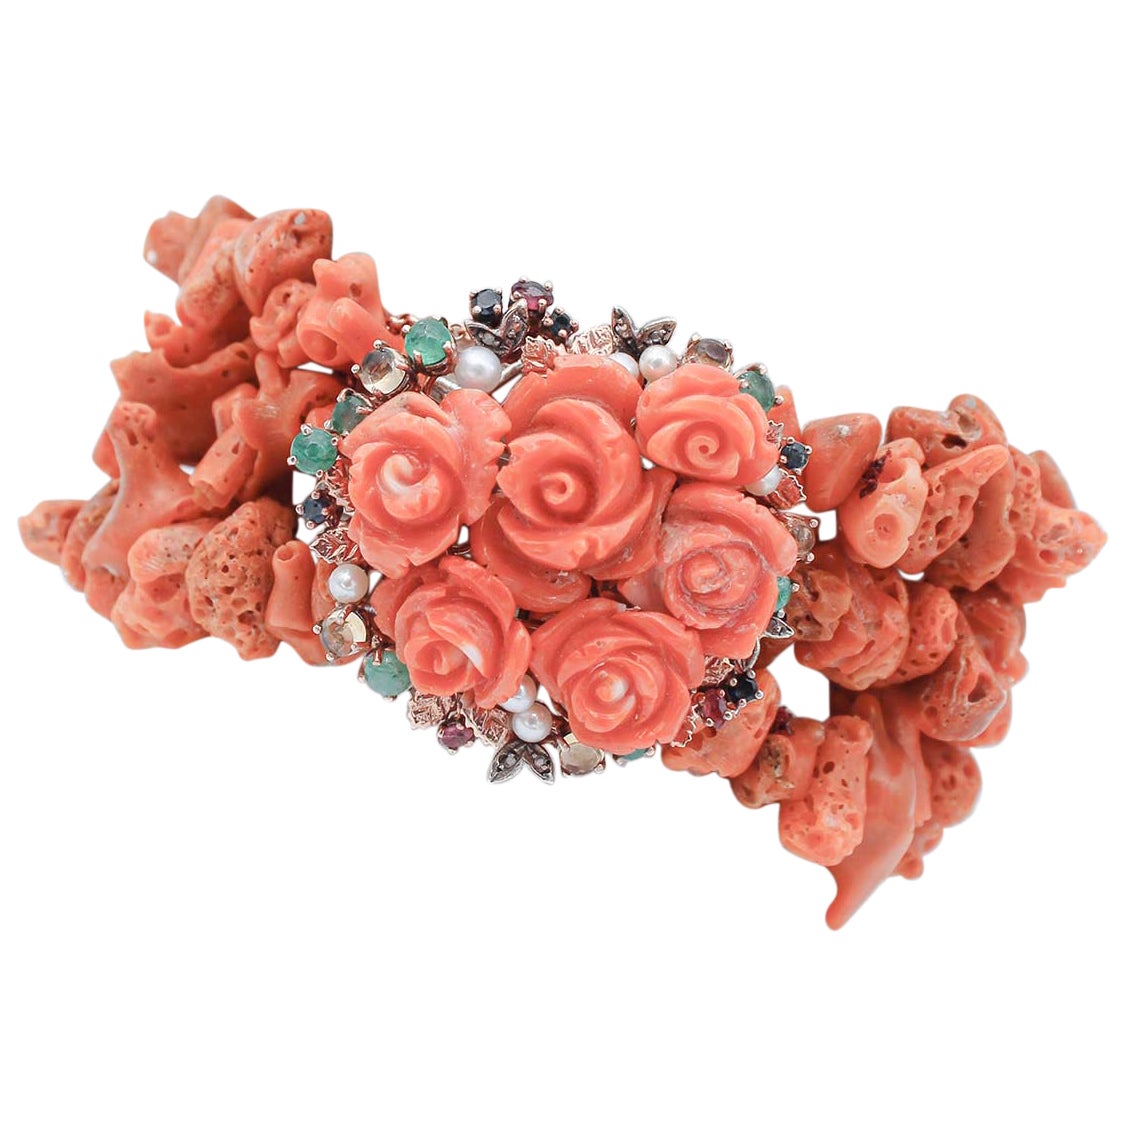 Coral, Topazs, Emeralds, Rubies Diamonds Sapphires Rose Gold and Silver Bracelet